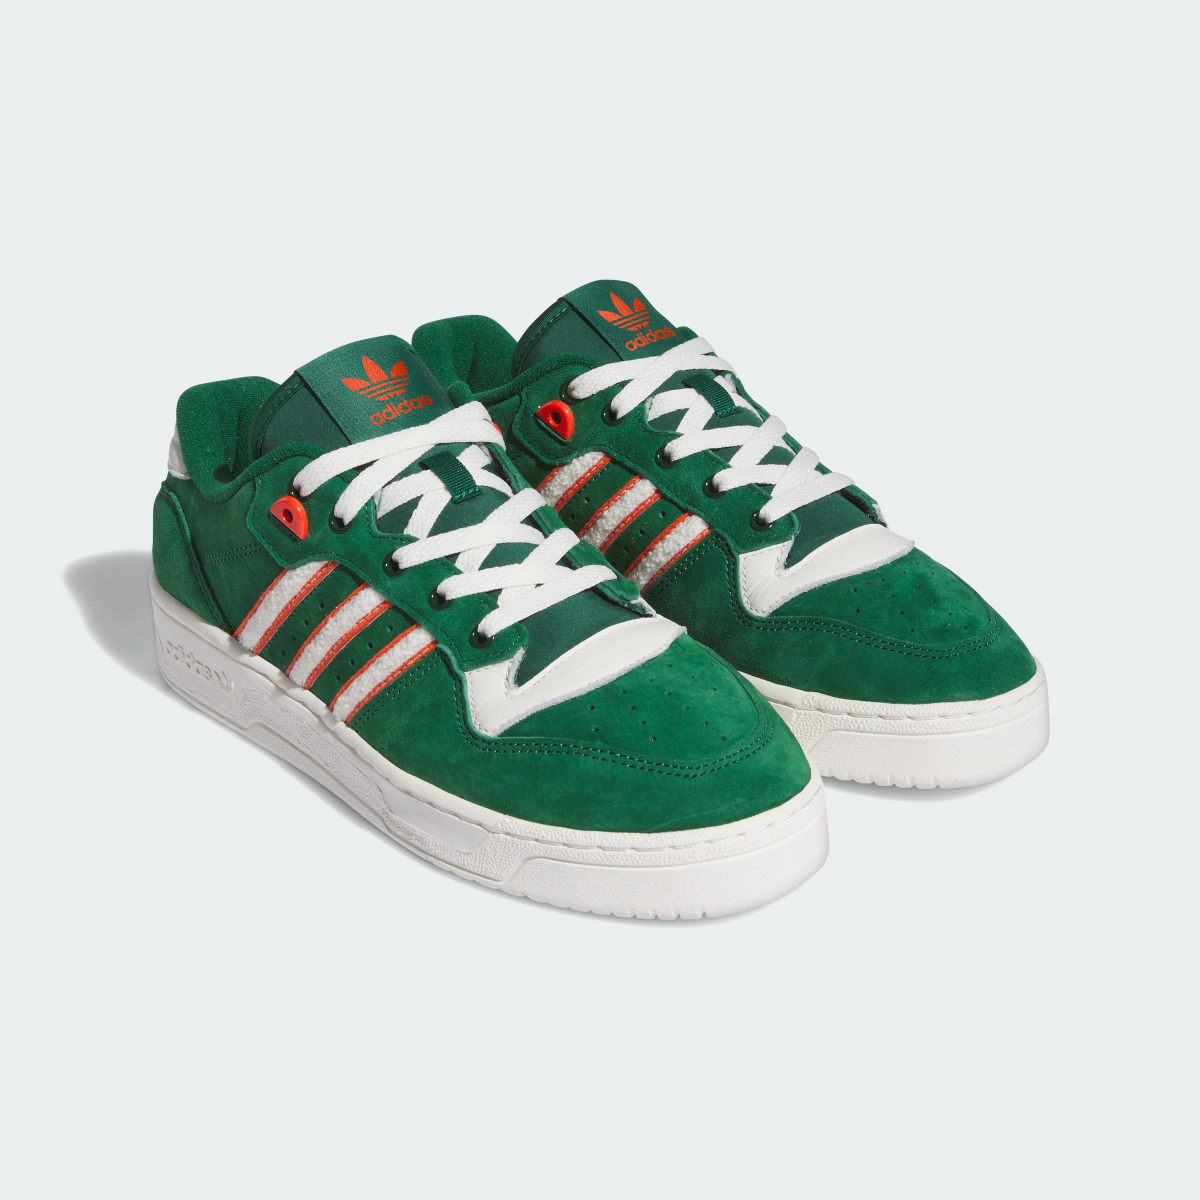 Adidas Miami Rivalry Low Shoes. 5